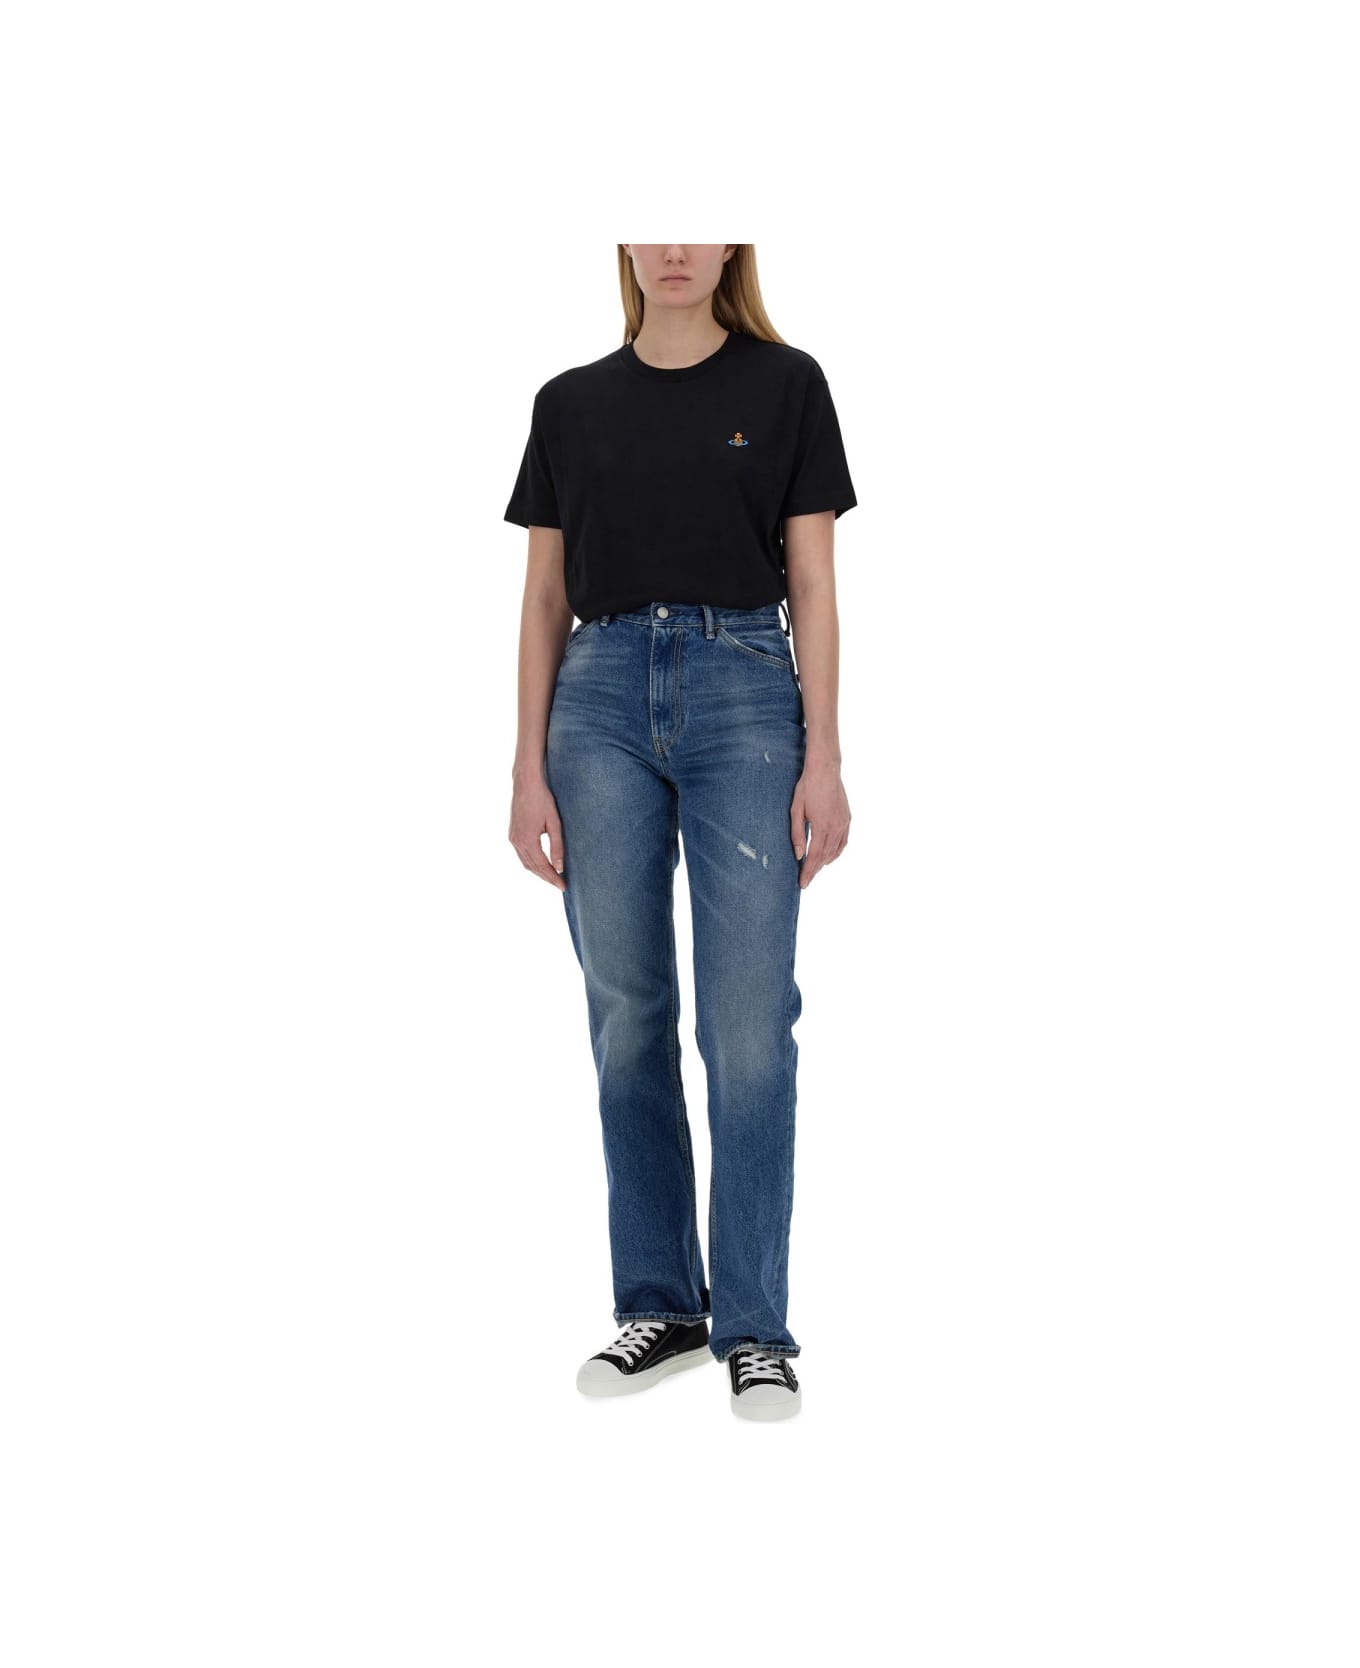 Vivienne Westwood T-shirt With Orb Embroidery - BLACK Tシャツ